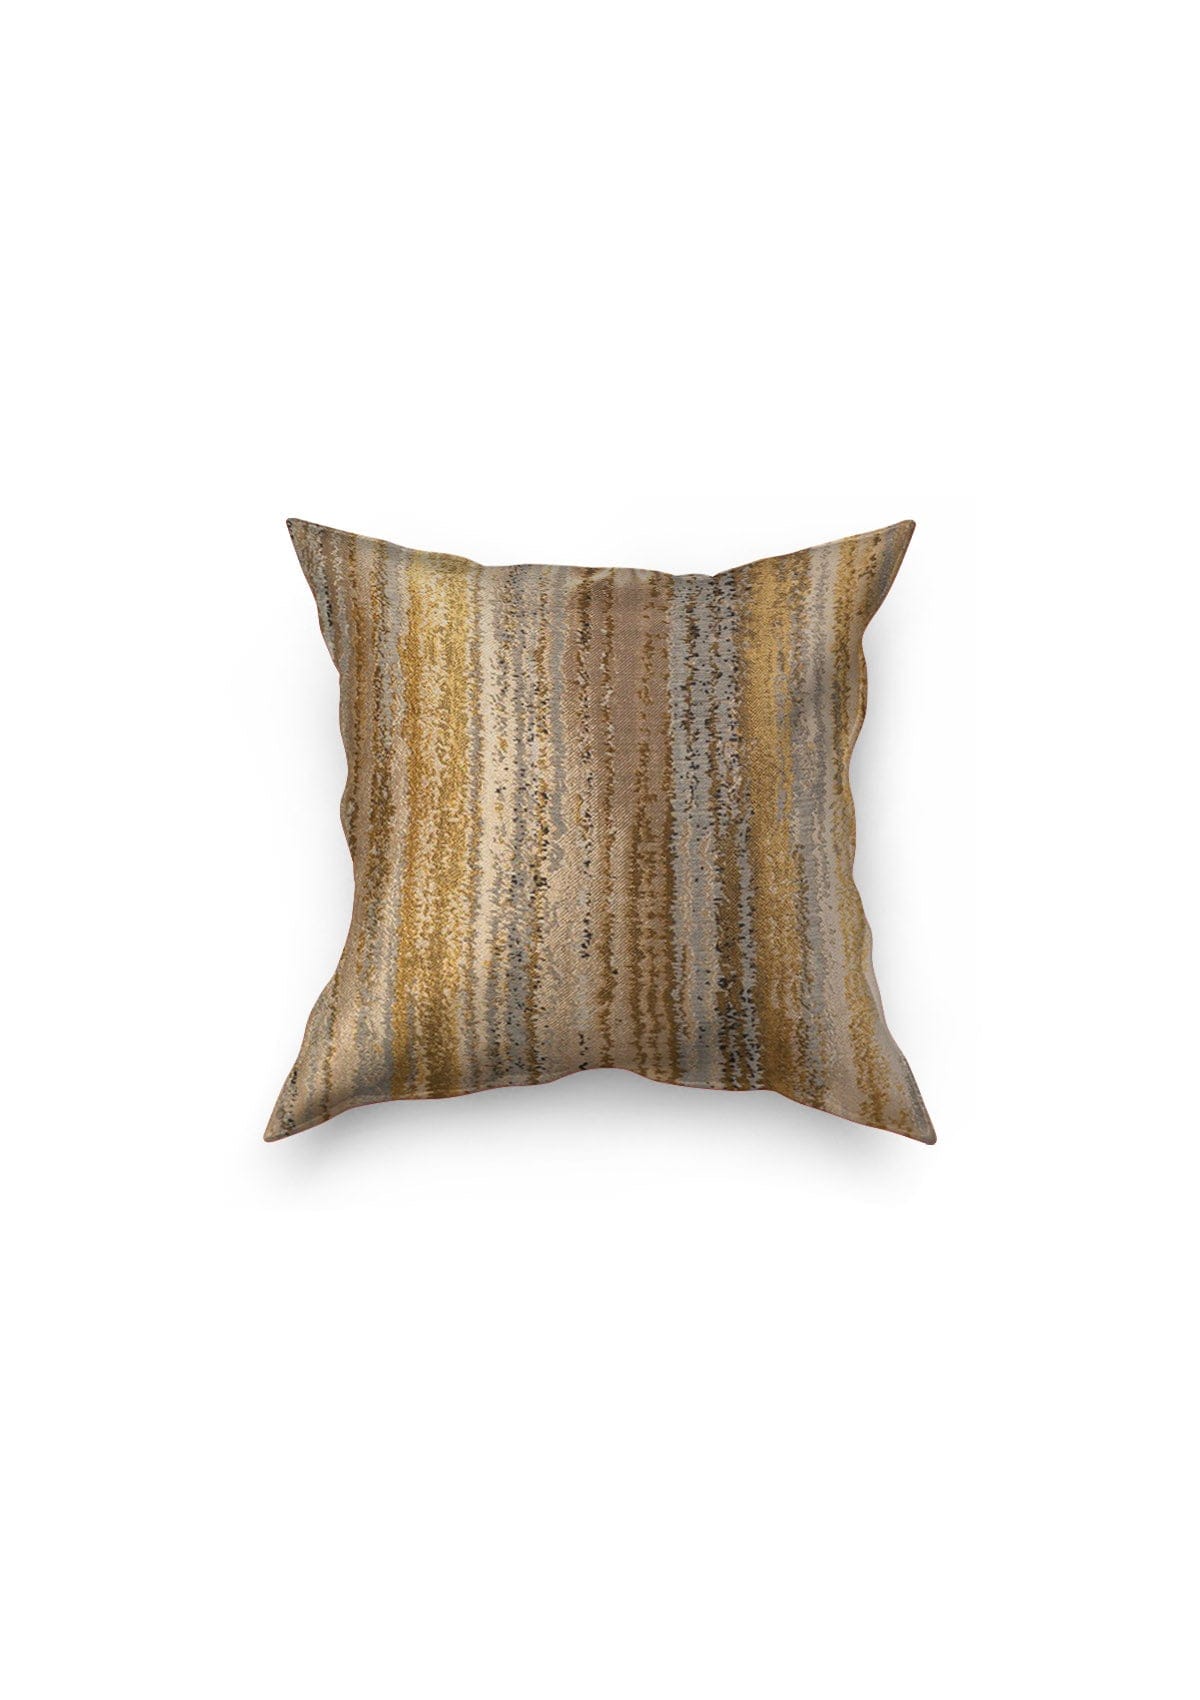 Champagne Gold Cushion Covers | CovermyCushion